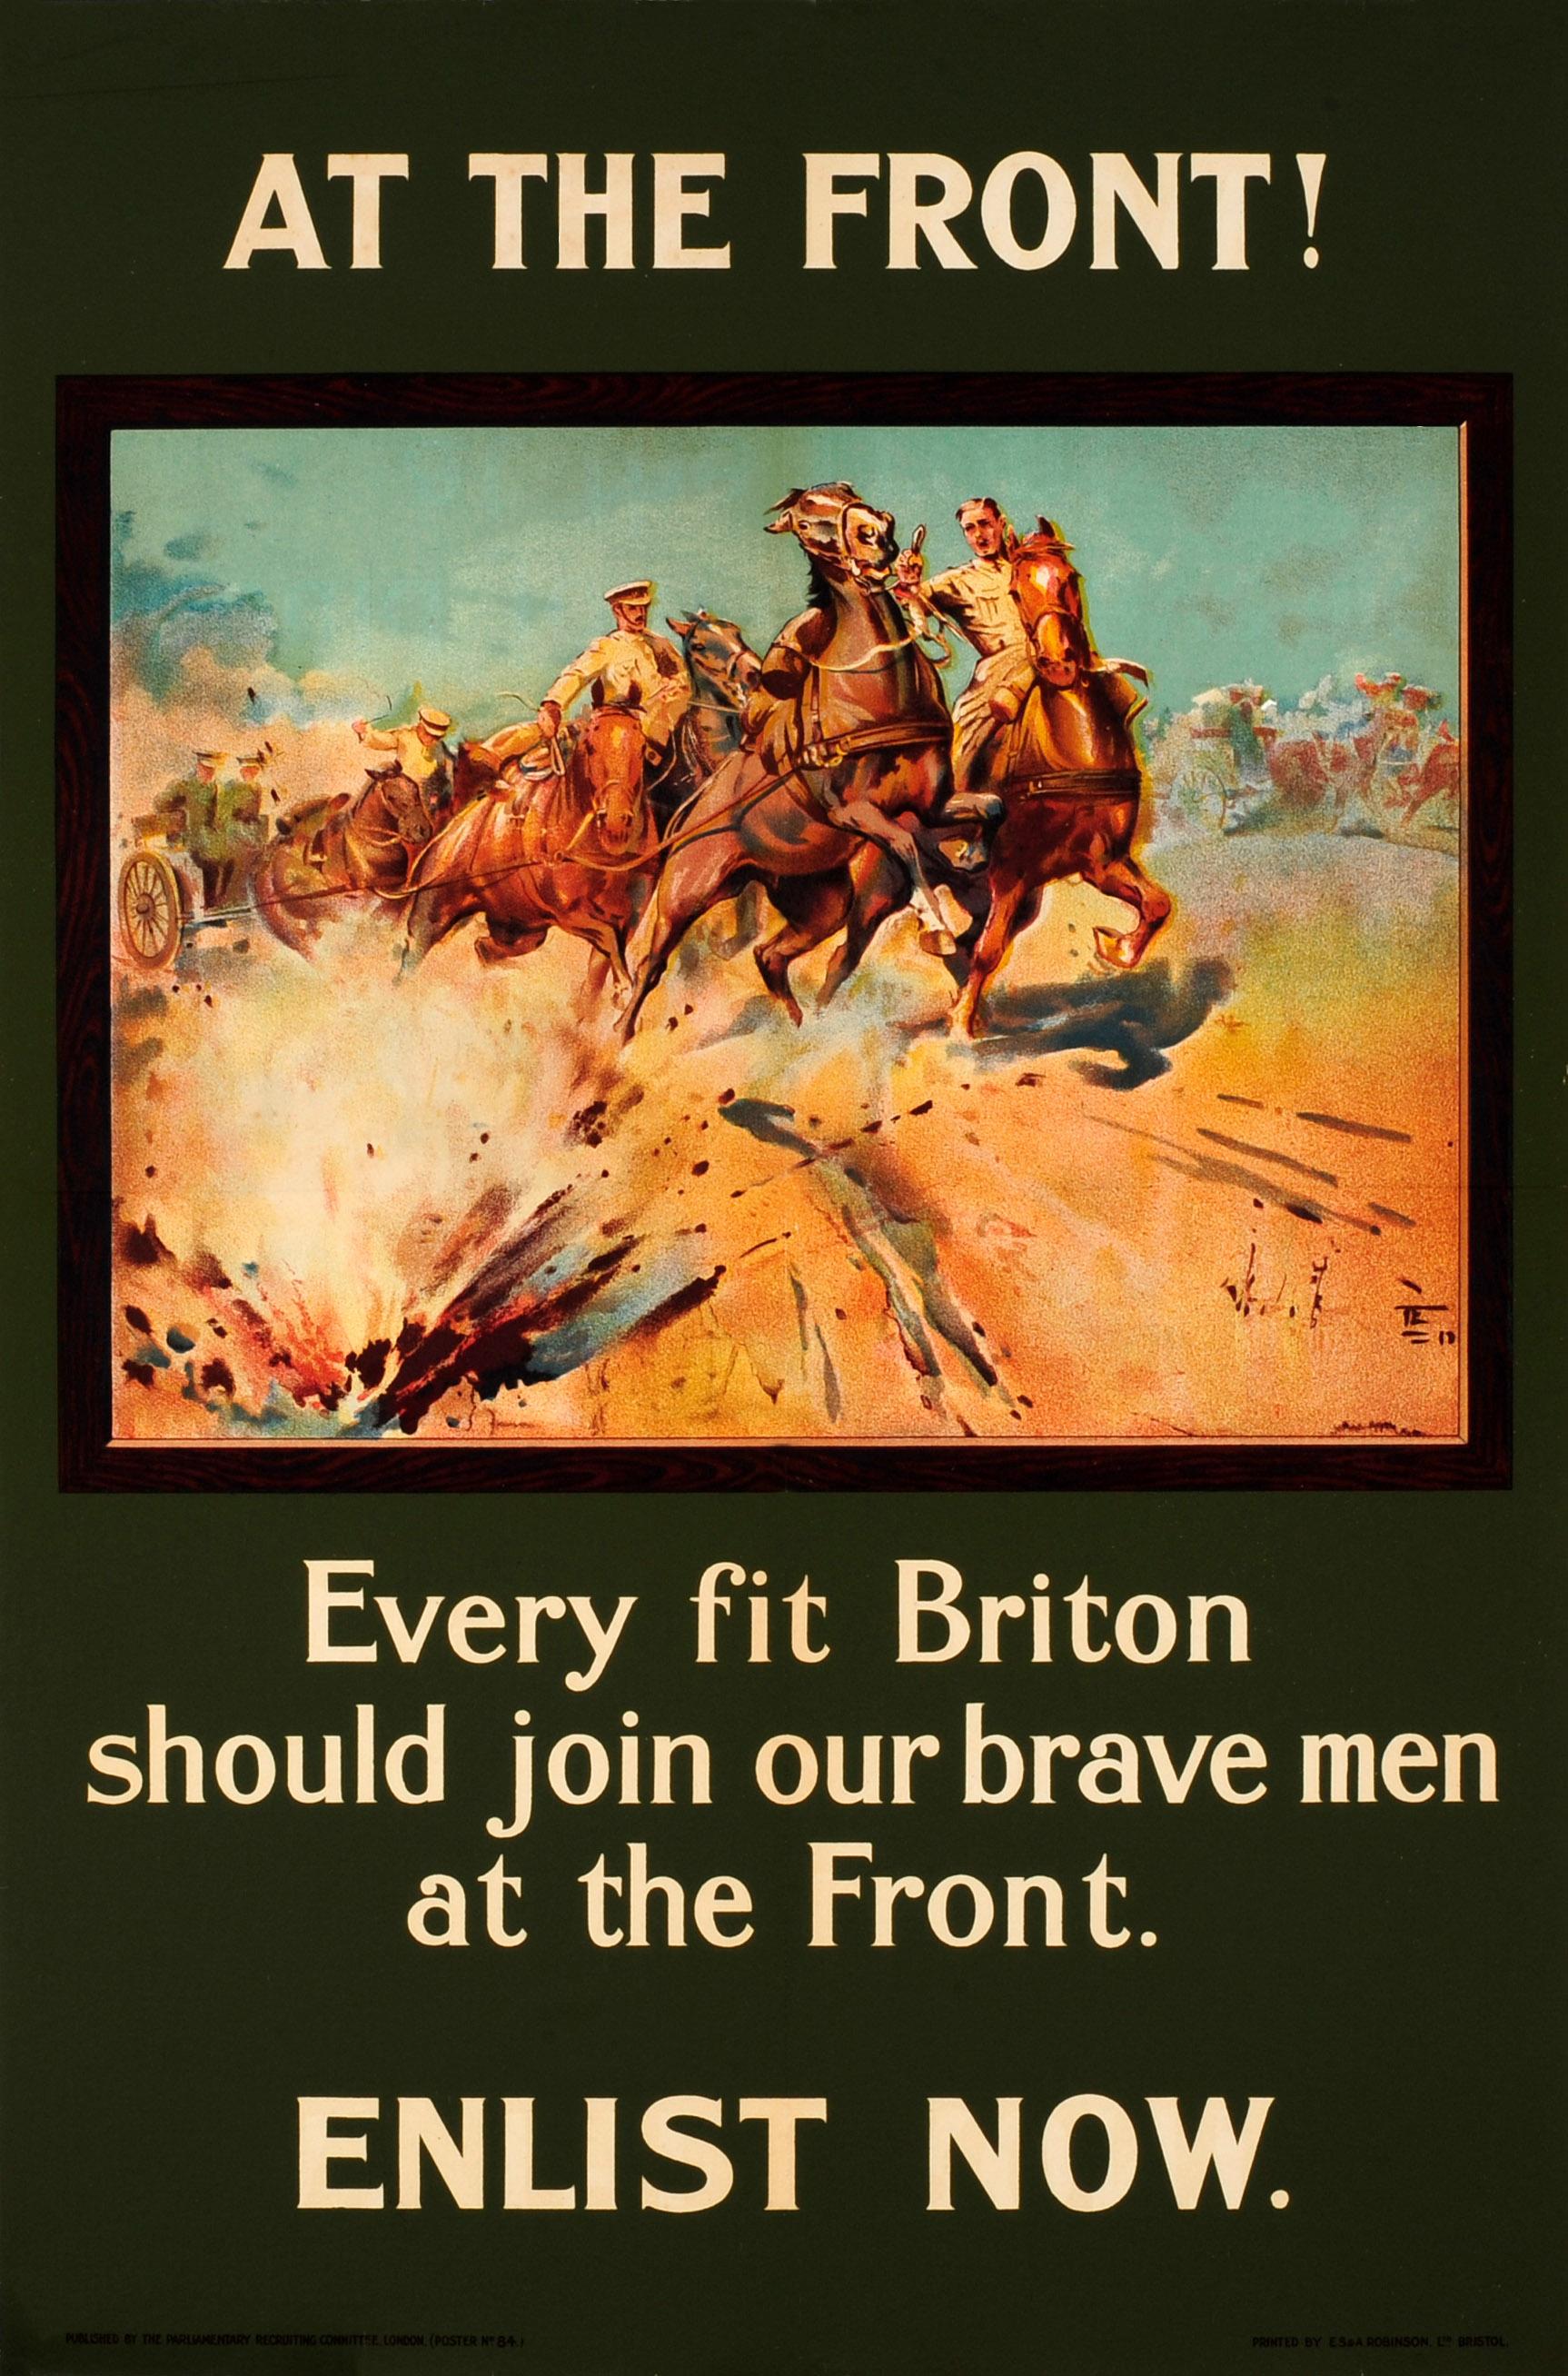 Lionel Edwards Print - Original 1915 WWI Recruitment Poster At The Front! Every Fit Briton Should Join